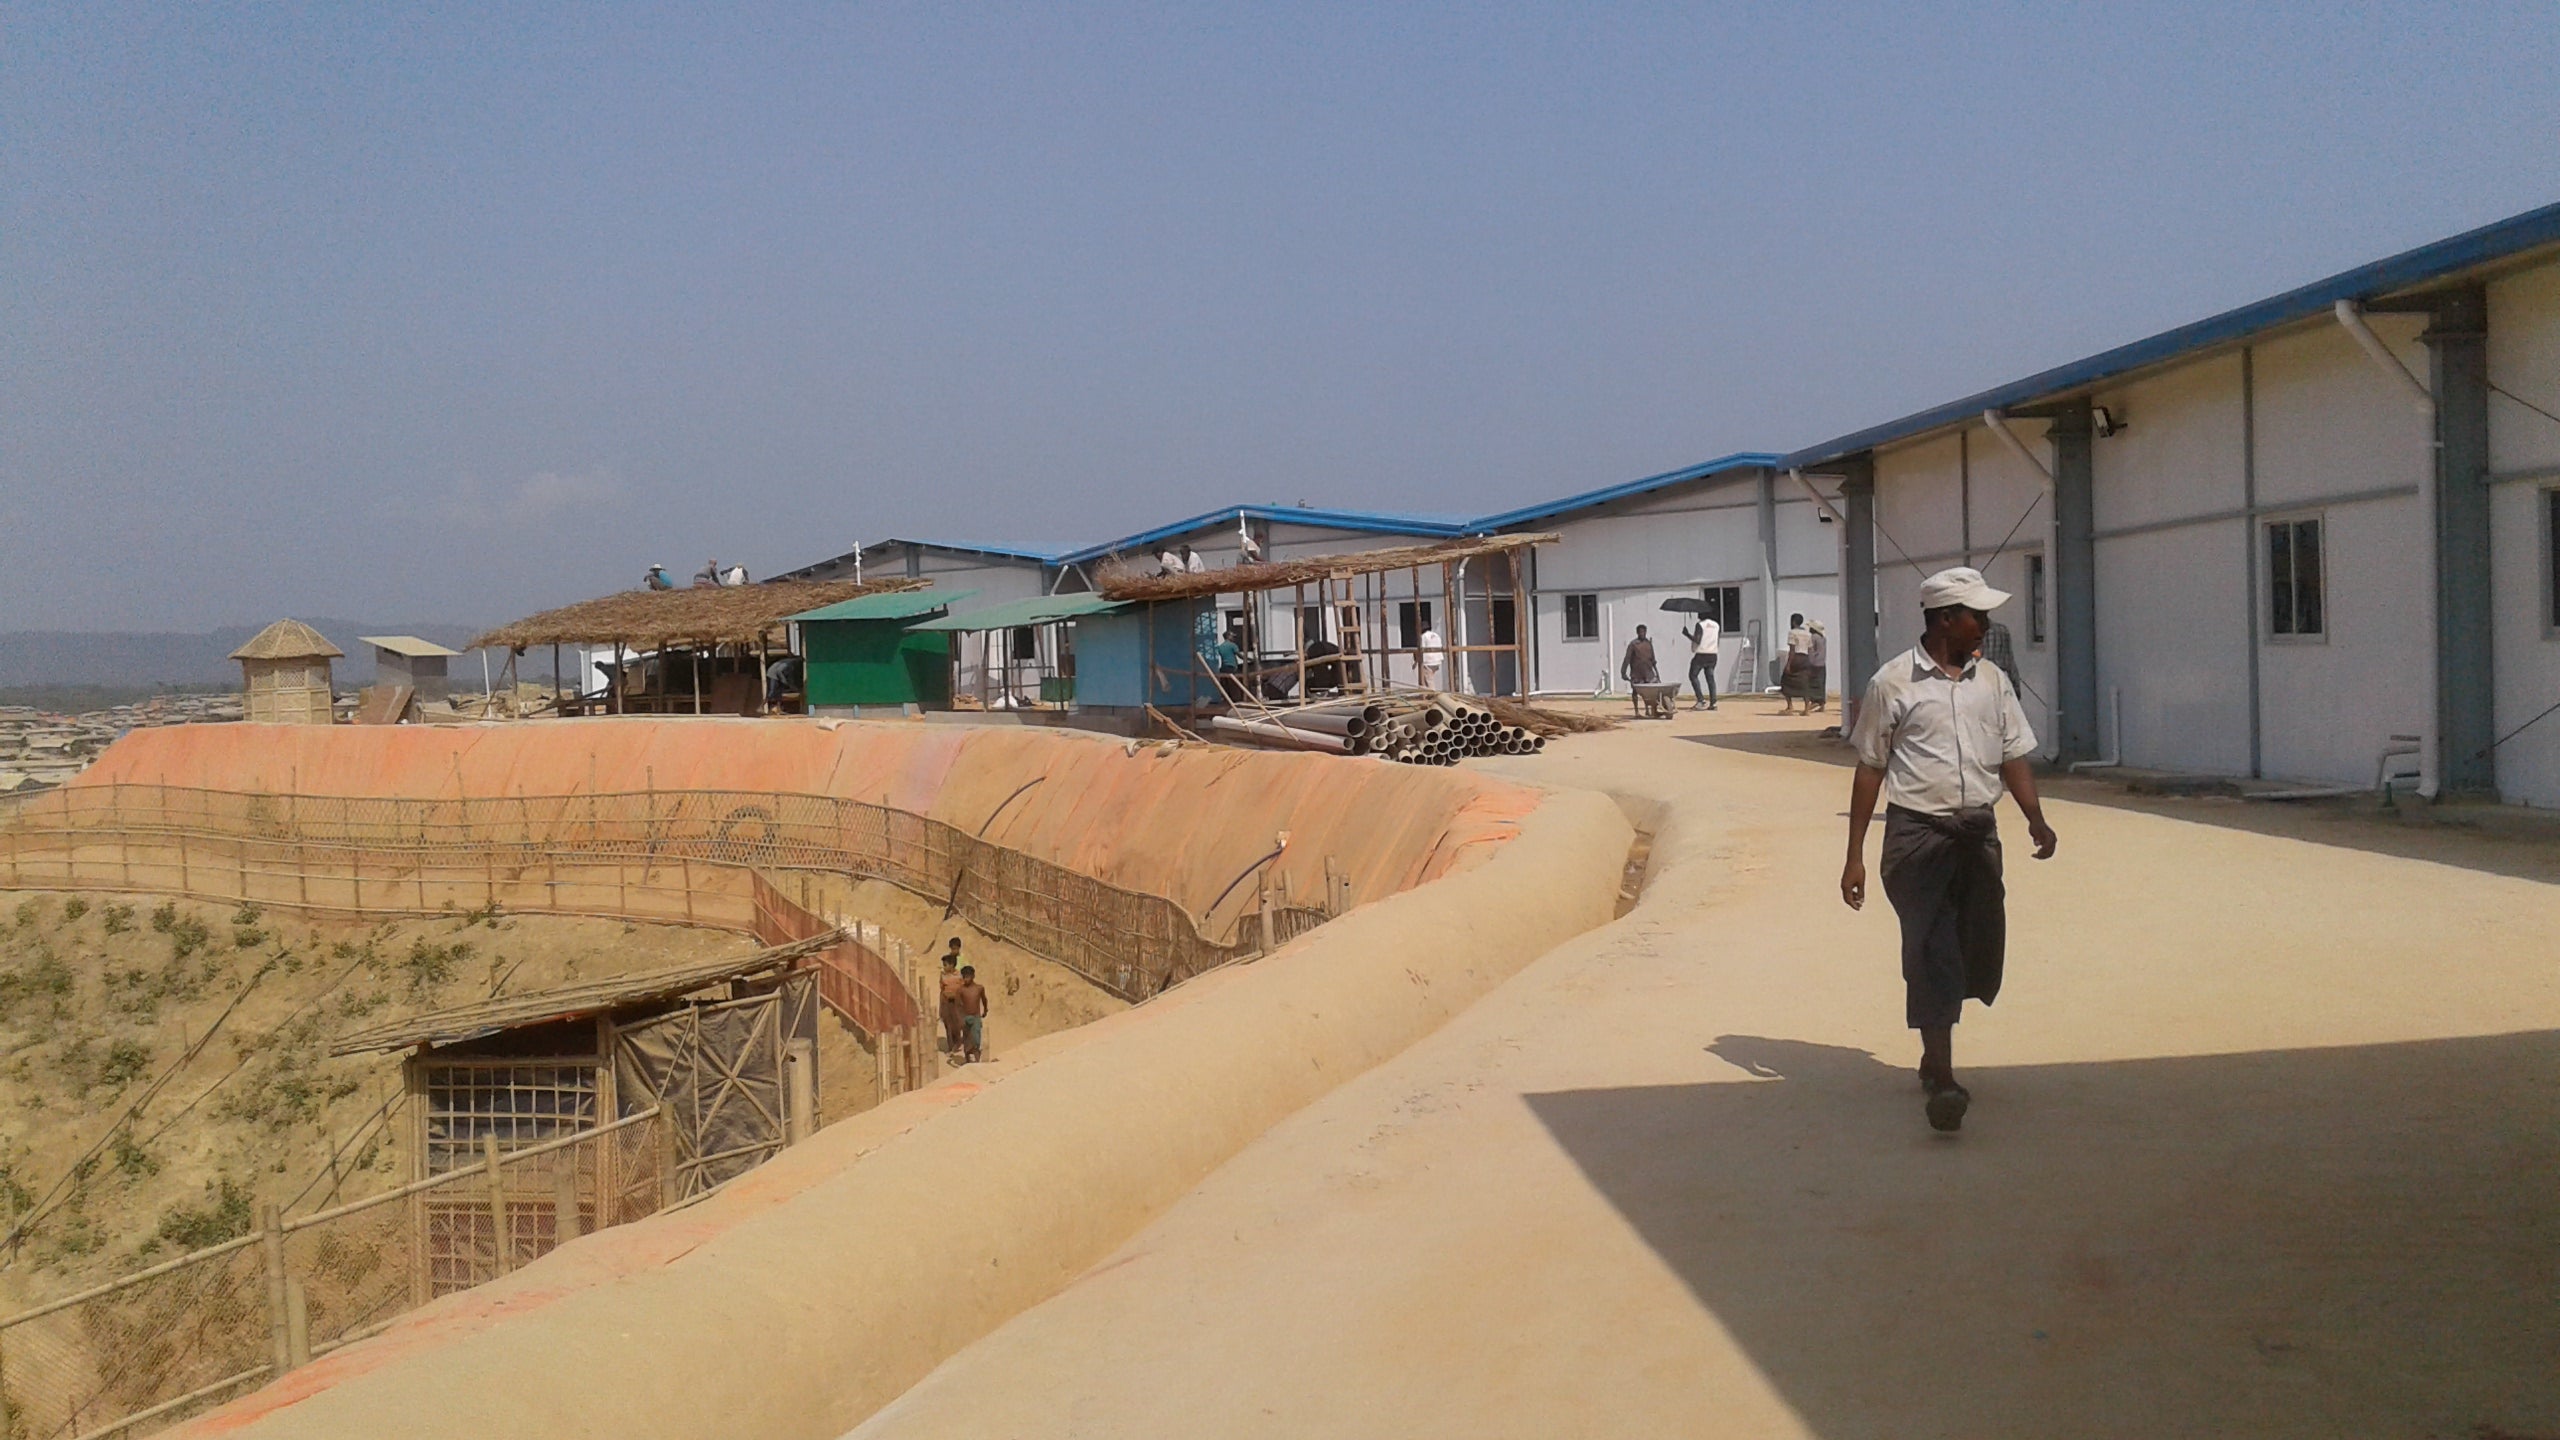 MSF’s new hospital for Rohingya refugees nears completion in early April 2018.